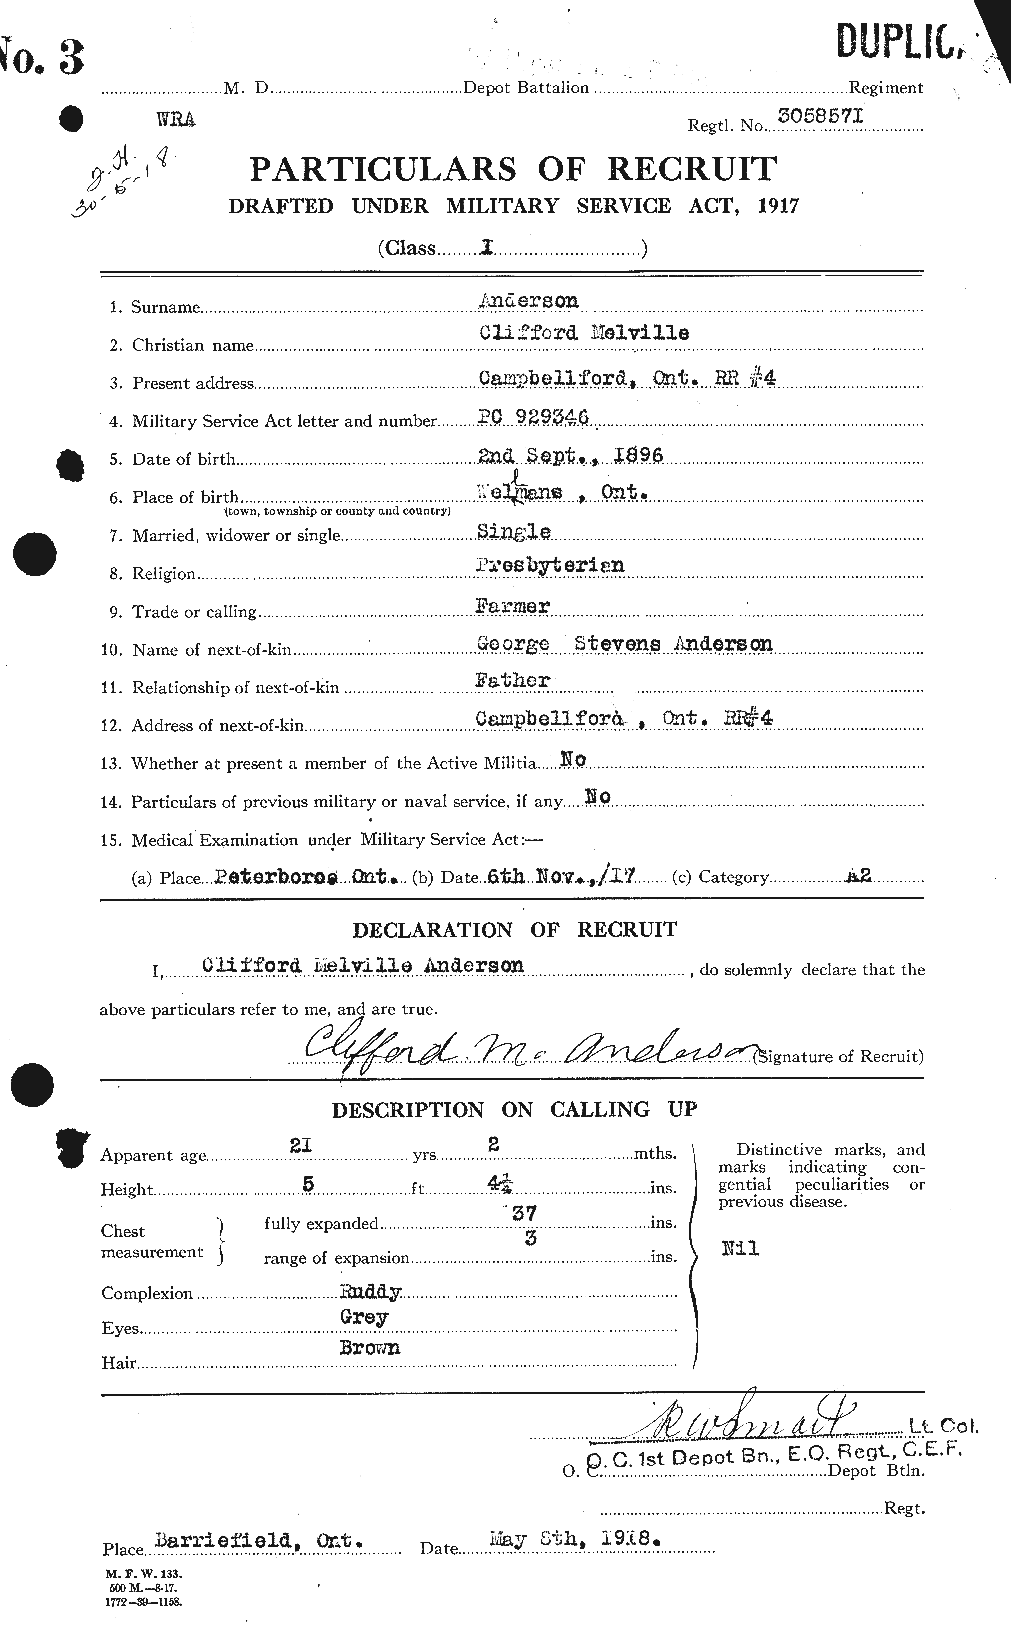 Personnel Records of the First World War - CEF 210060a